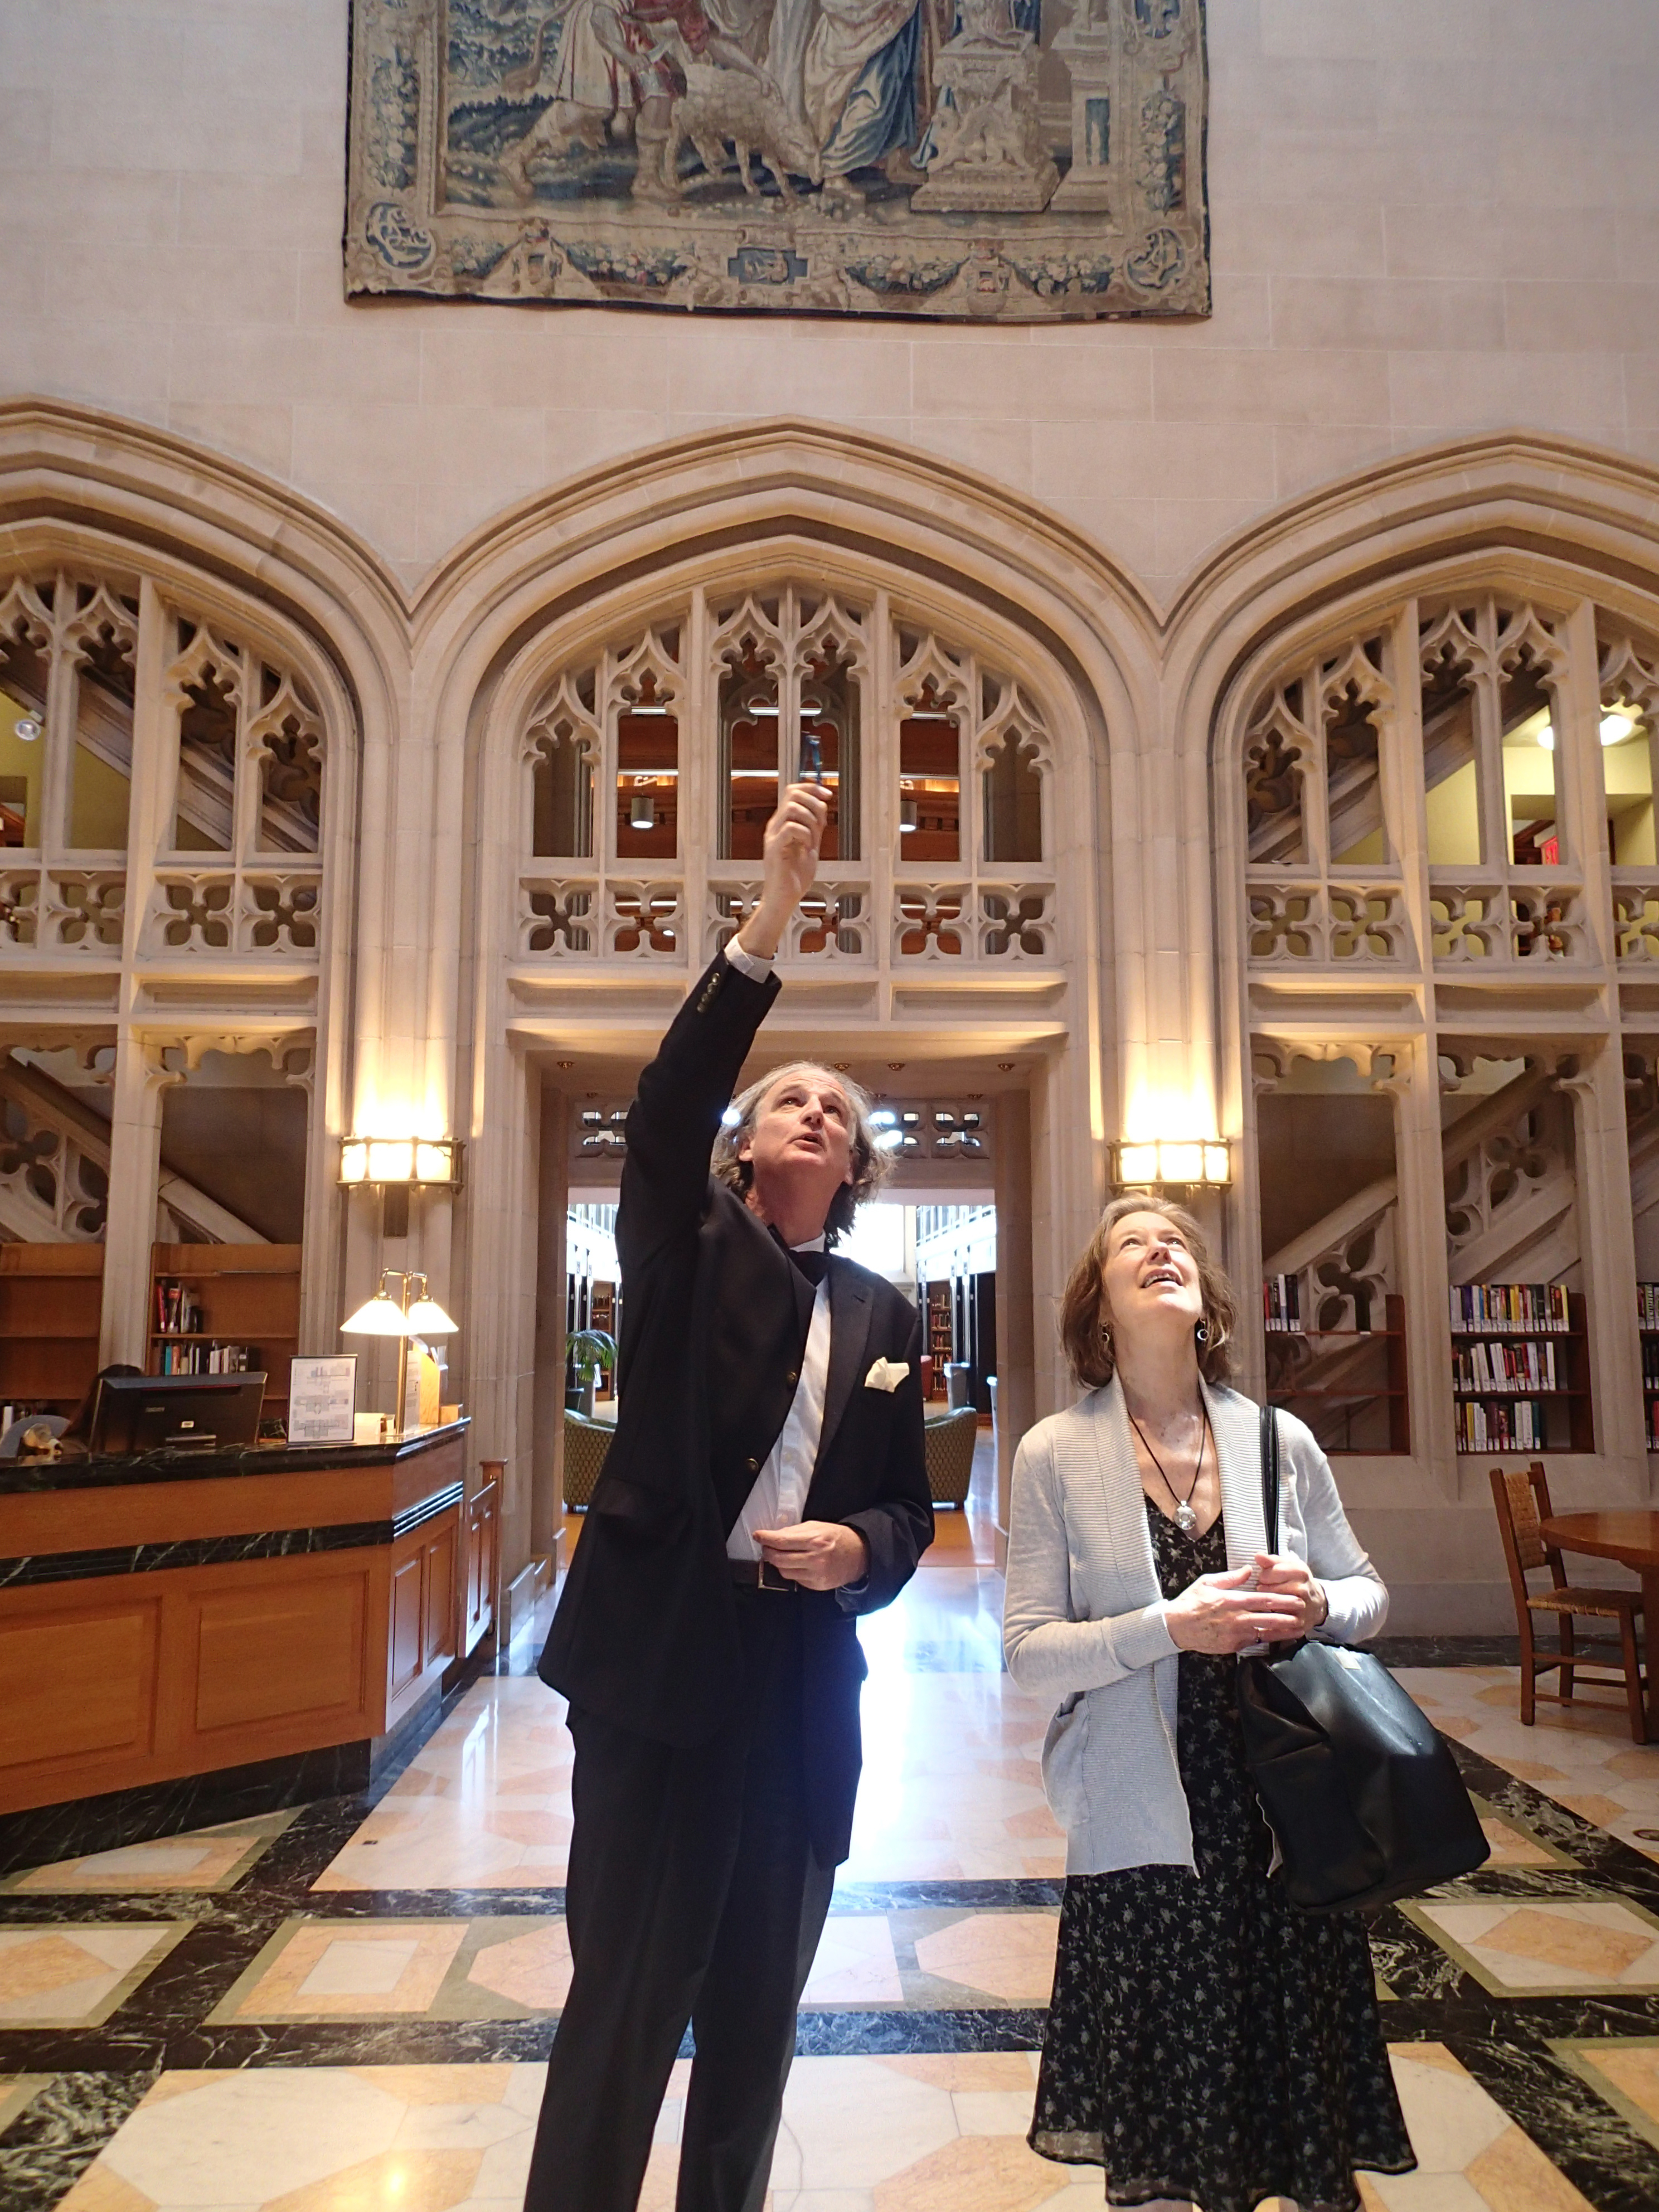 Thomas Hill explains the iconography of the cycle of tapestries adorning the entrance hall to the Vassar College Library. Photography © Mildred Budny